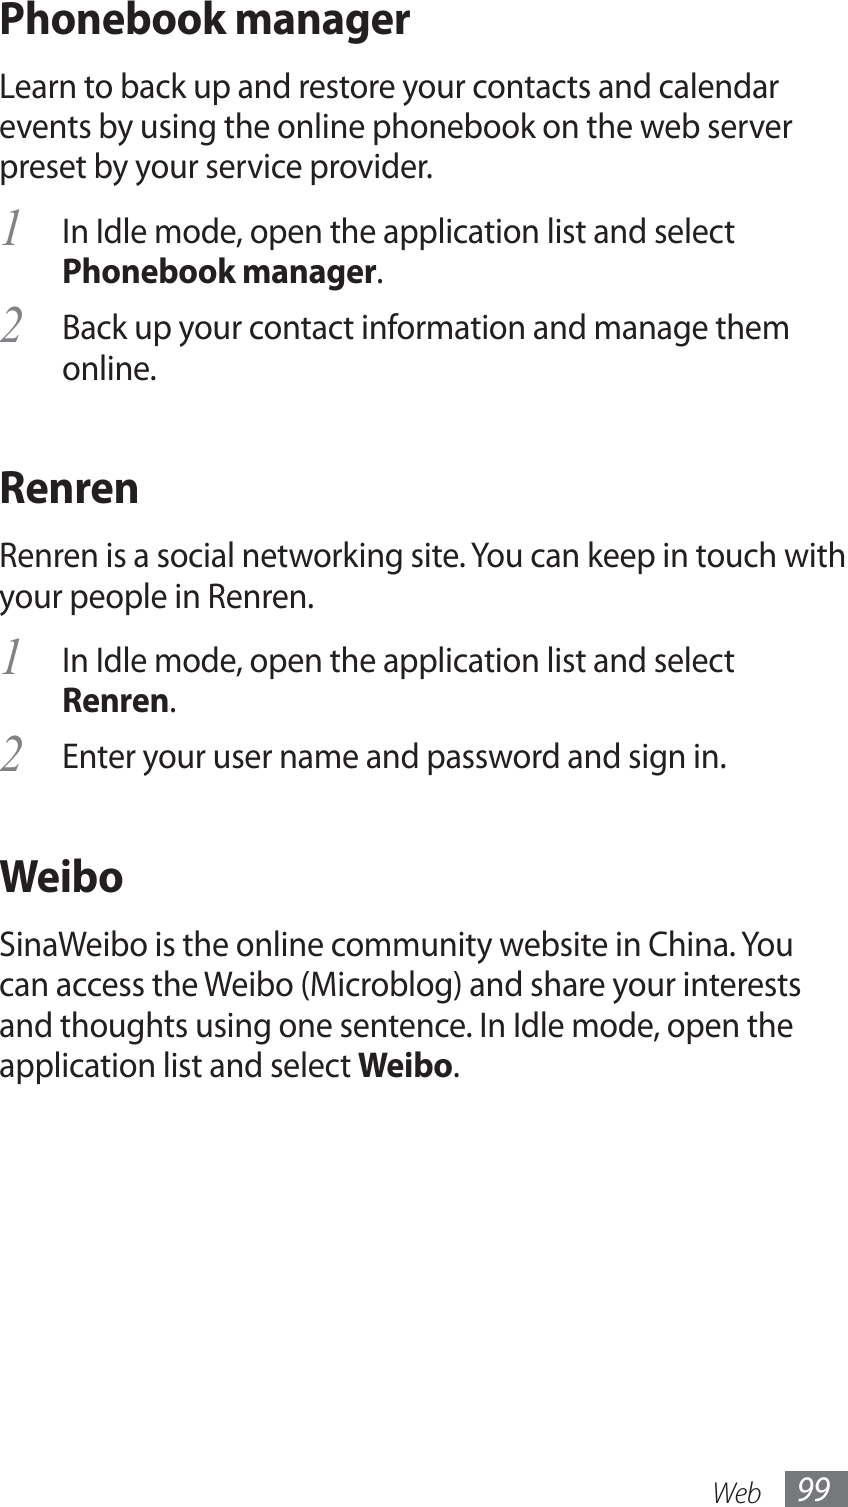 Web 99Phonebook managerLearn to back up and restore your contacts and calendar events by using the online phonebook on the web server preset by your service provider.In Idle mode, open the application list and select 1 Phonebook manager.Back up your contact information and manage them 2 online.RenrenRenren is a social networking site. You can keep in touch with your people in Renren.In Idle mode, open the application list and select 1 Renren.Enter your user name and password and sign in.2 WeiboSinaWeibo is the online community website in China. You can access the Weibo (Microblog) and share your interests and thoughts using one sentence. In Idle mode, open the application list and select Weibo.